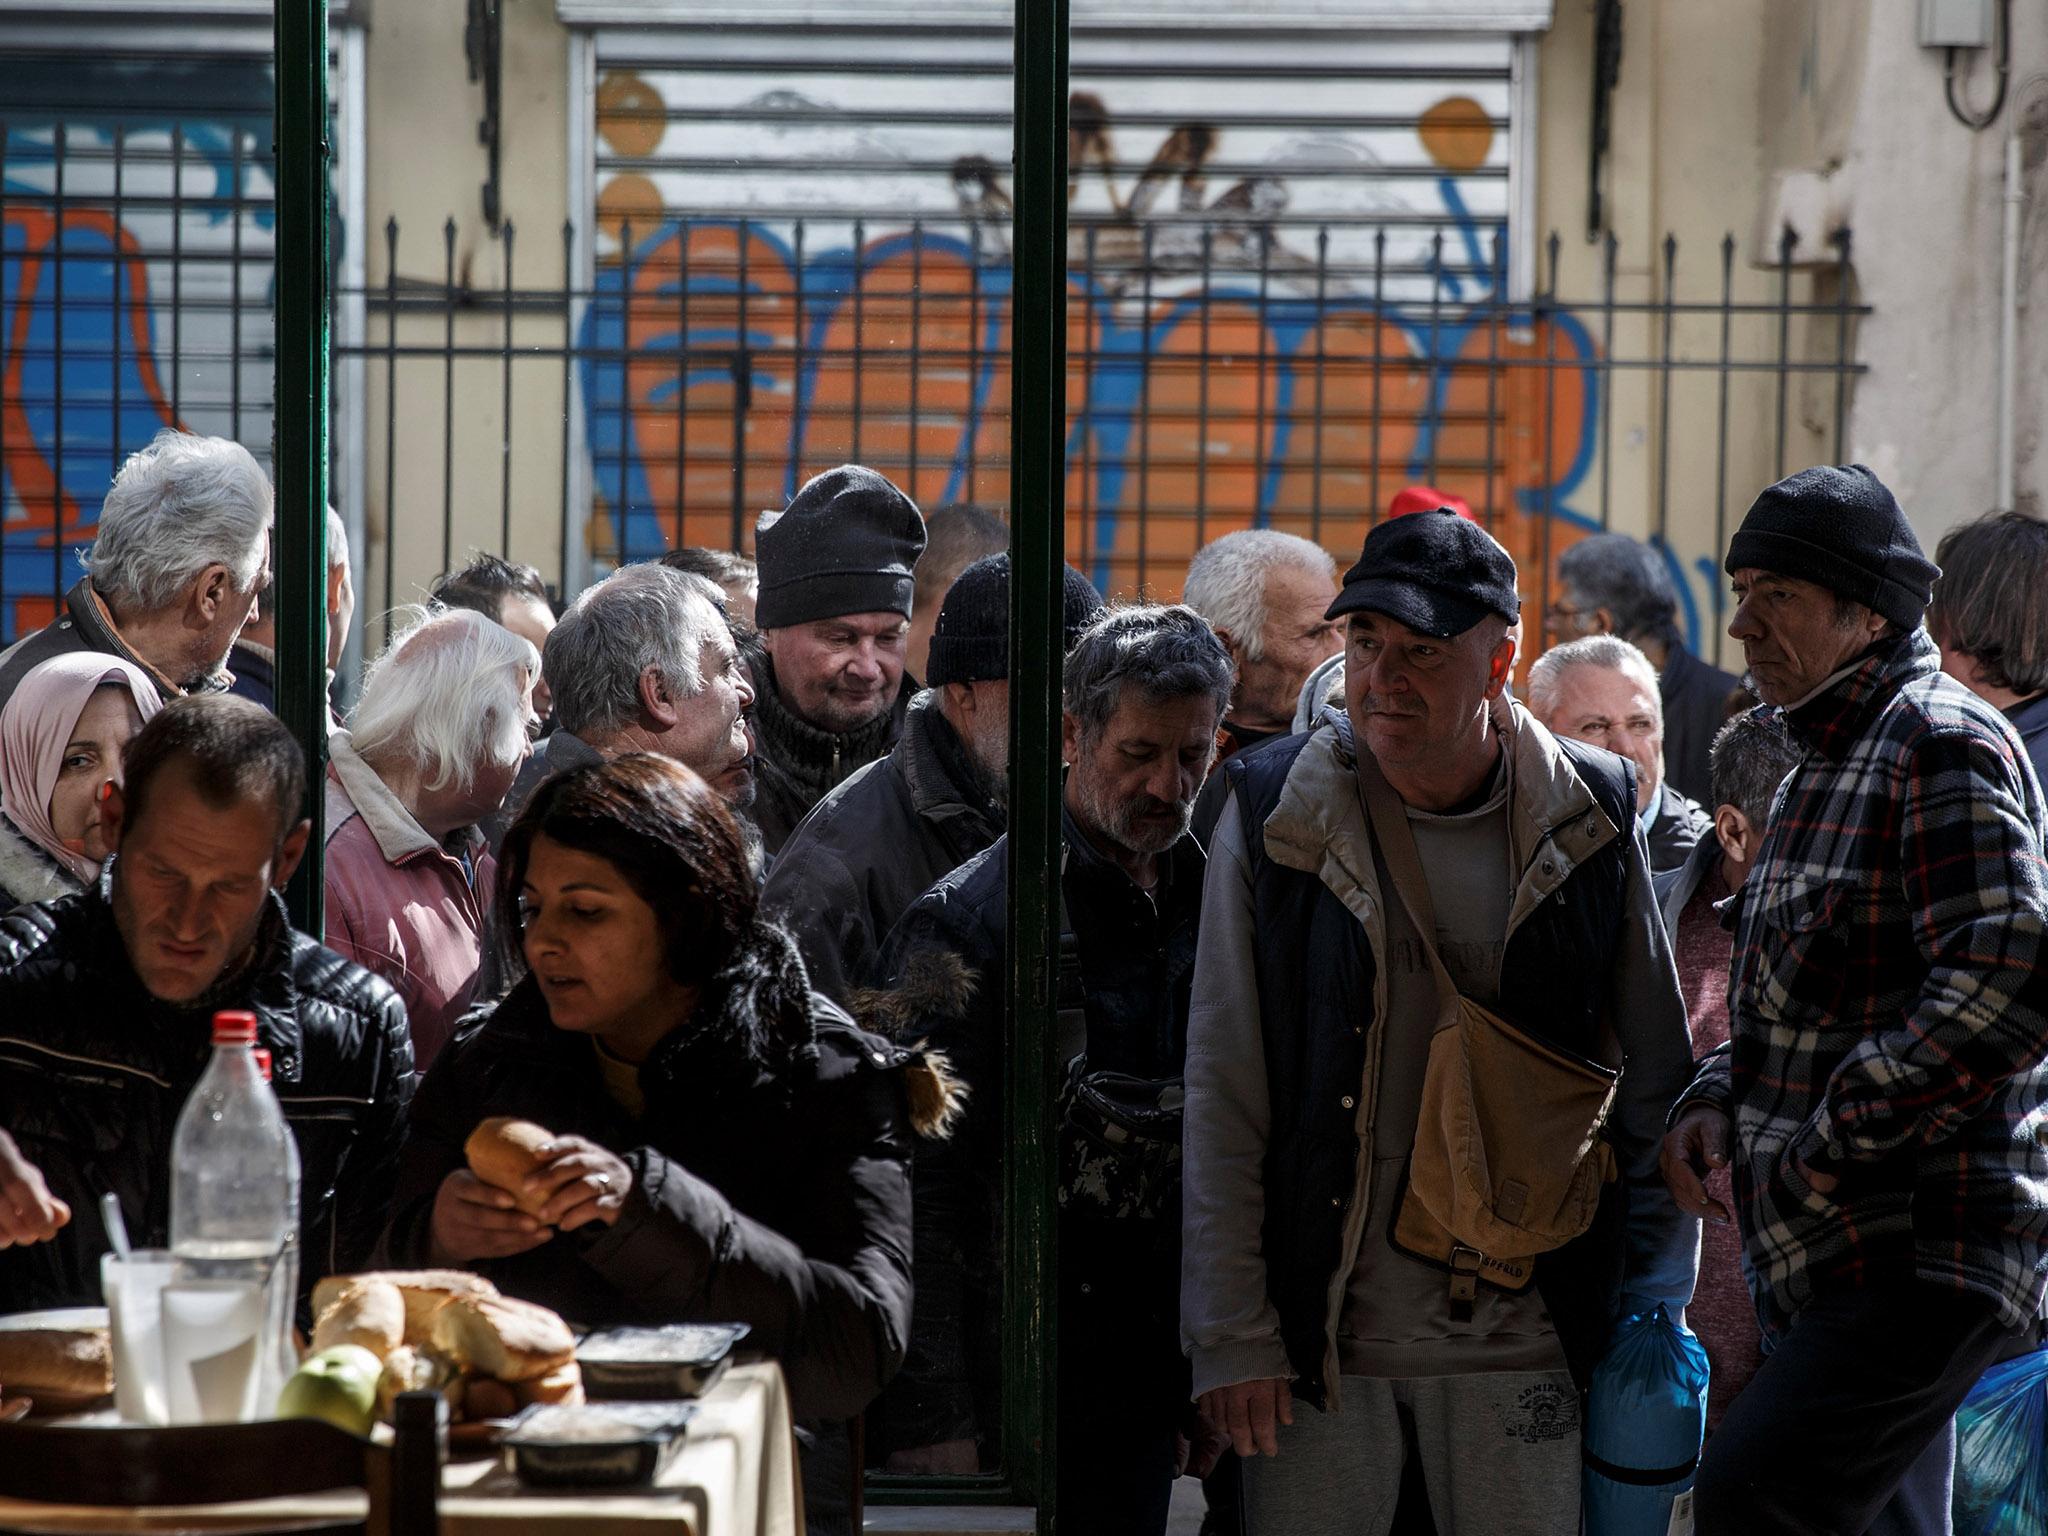 Many on relying on food handouts from soup kitchens like this one at an Orthodox church in Athens